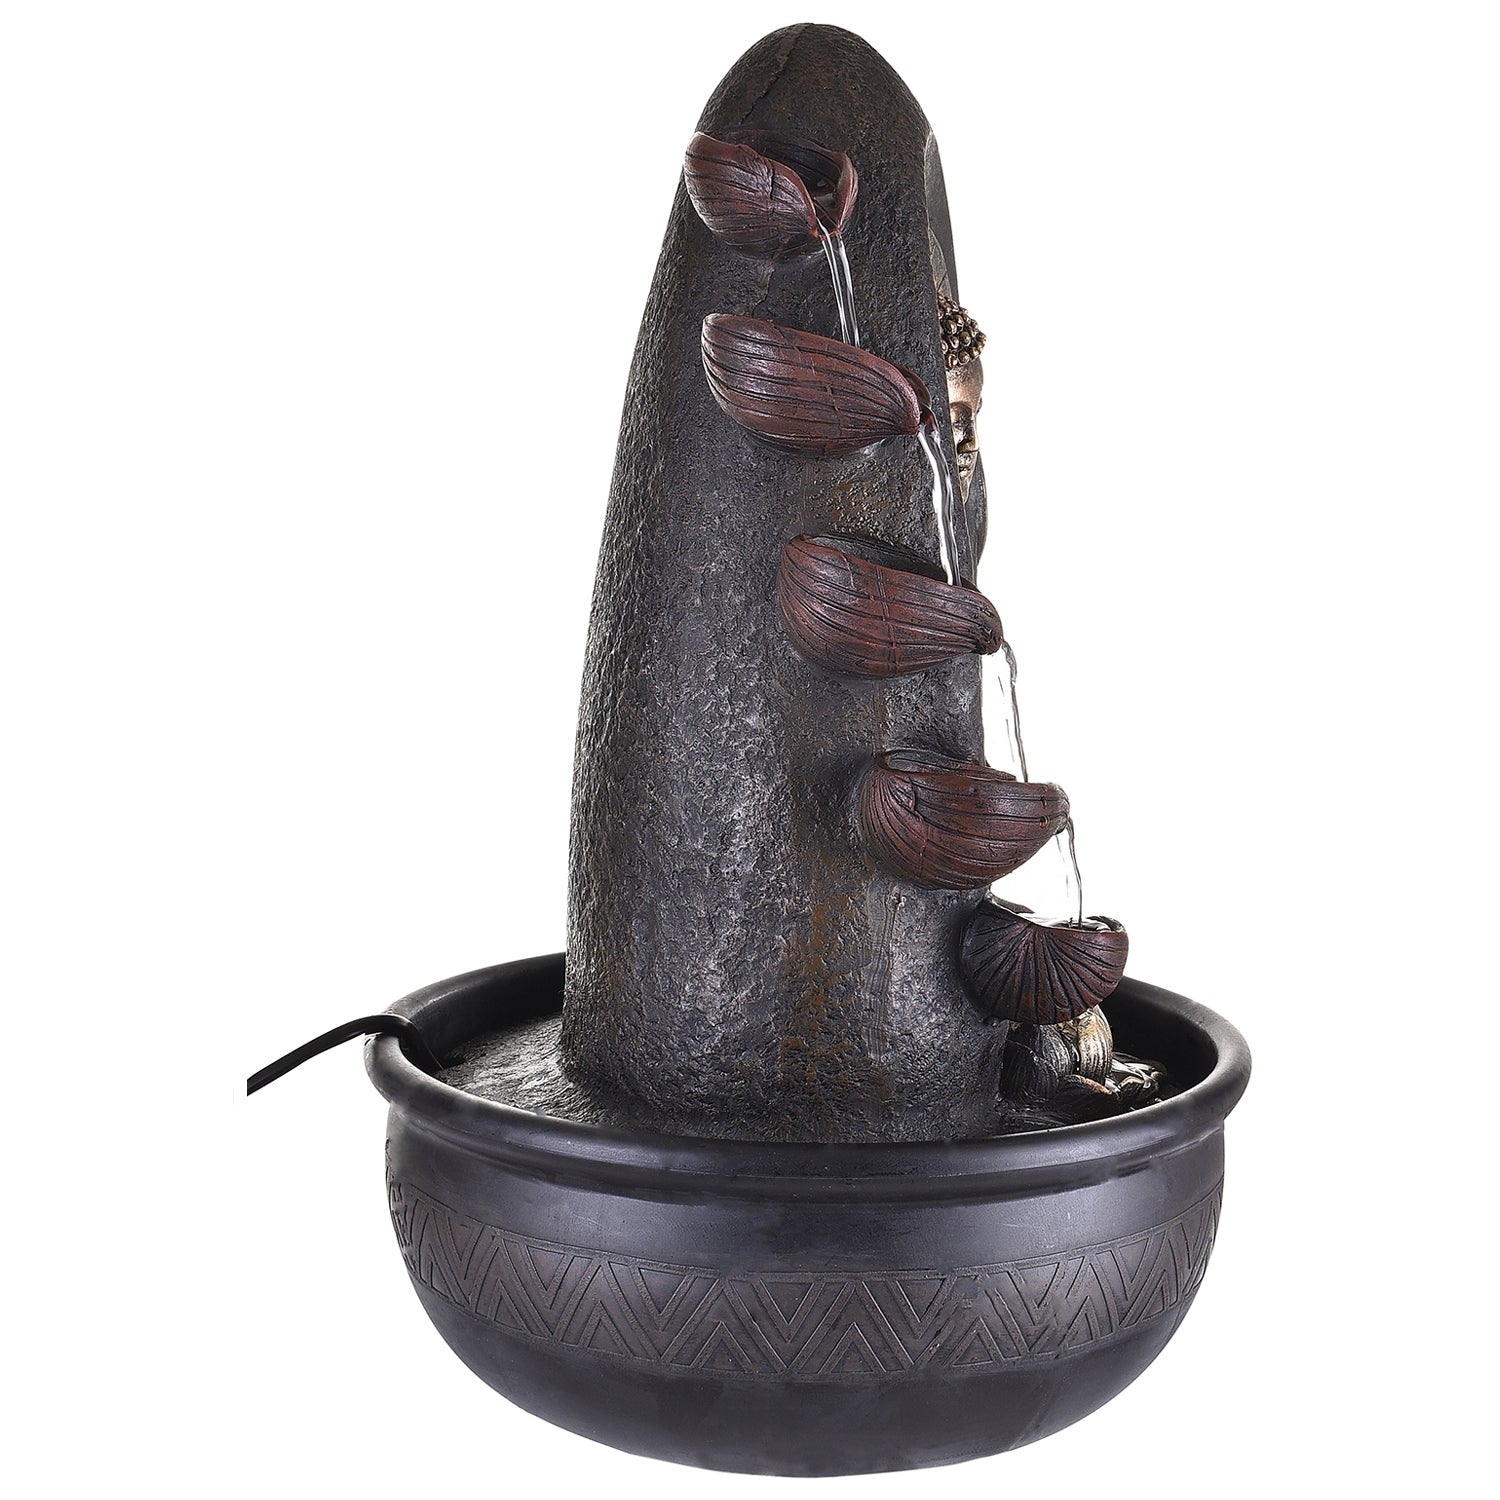 Meditating Lord Buddha Water Fountain For Home 4